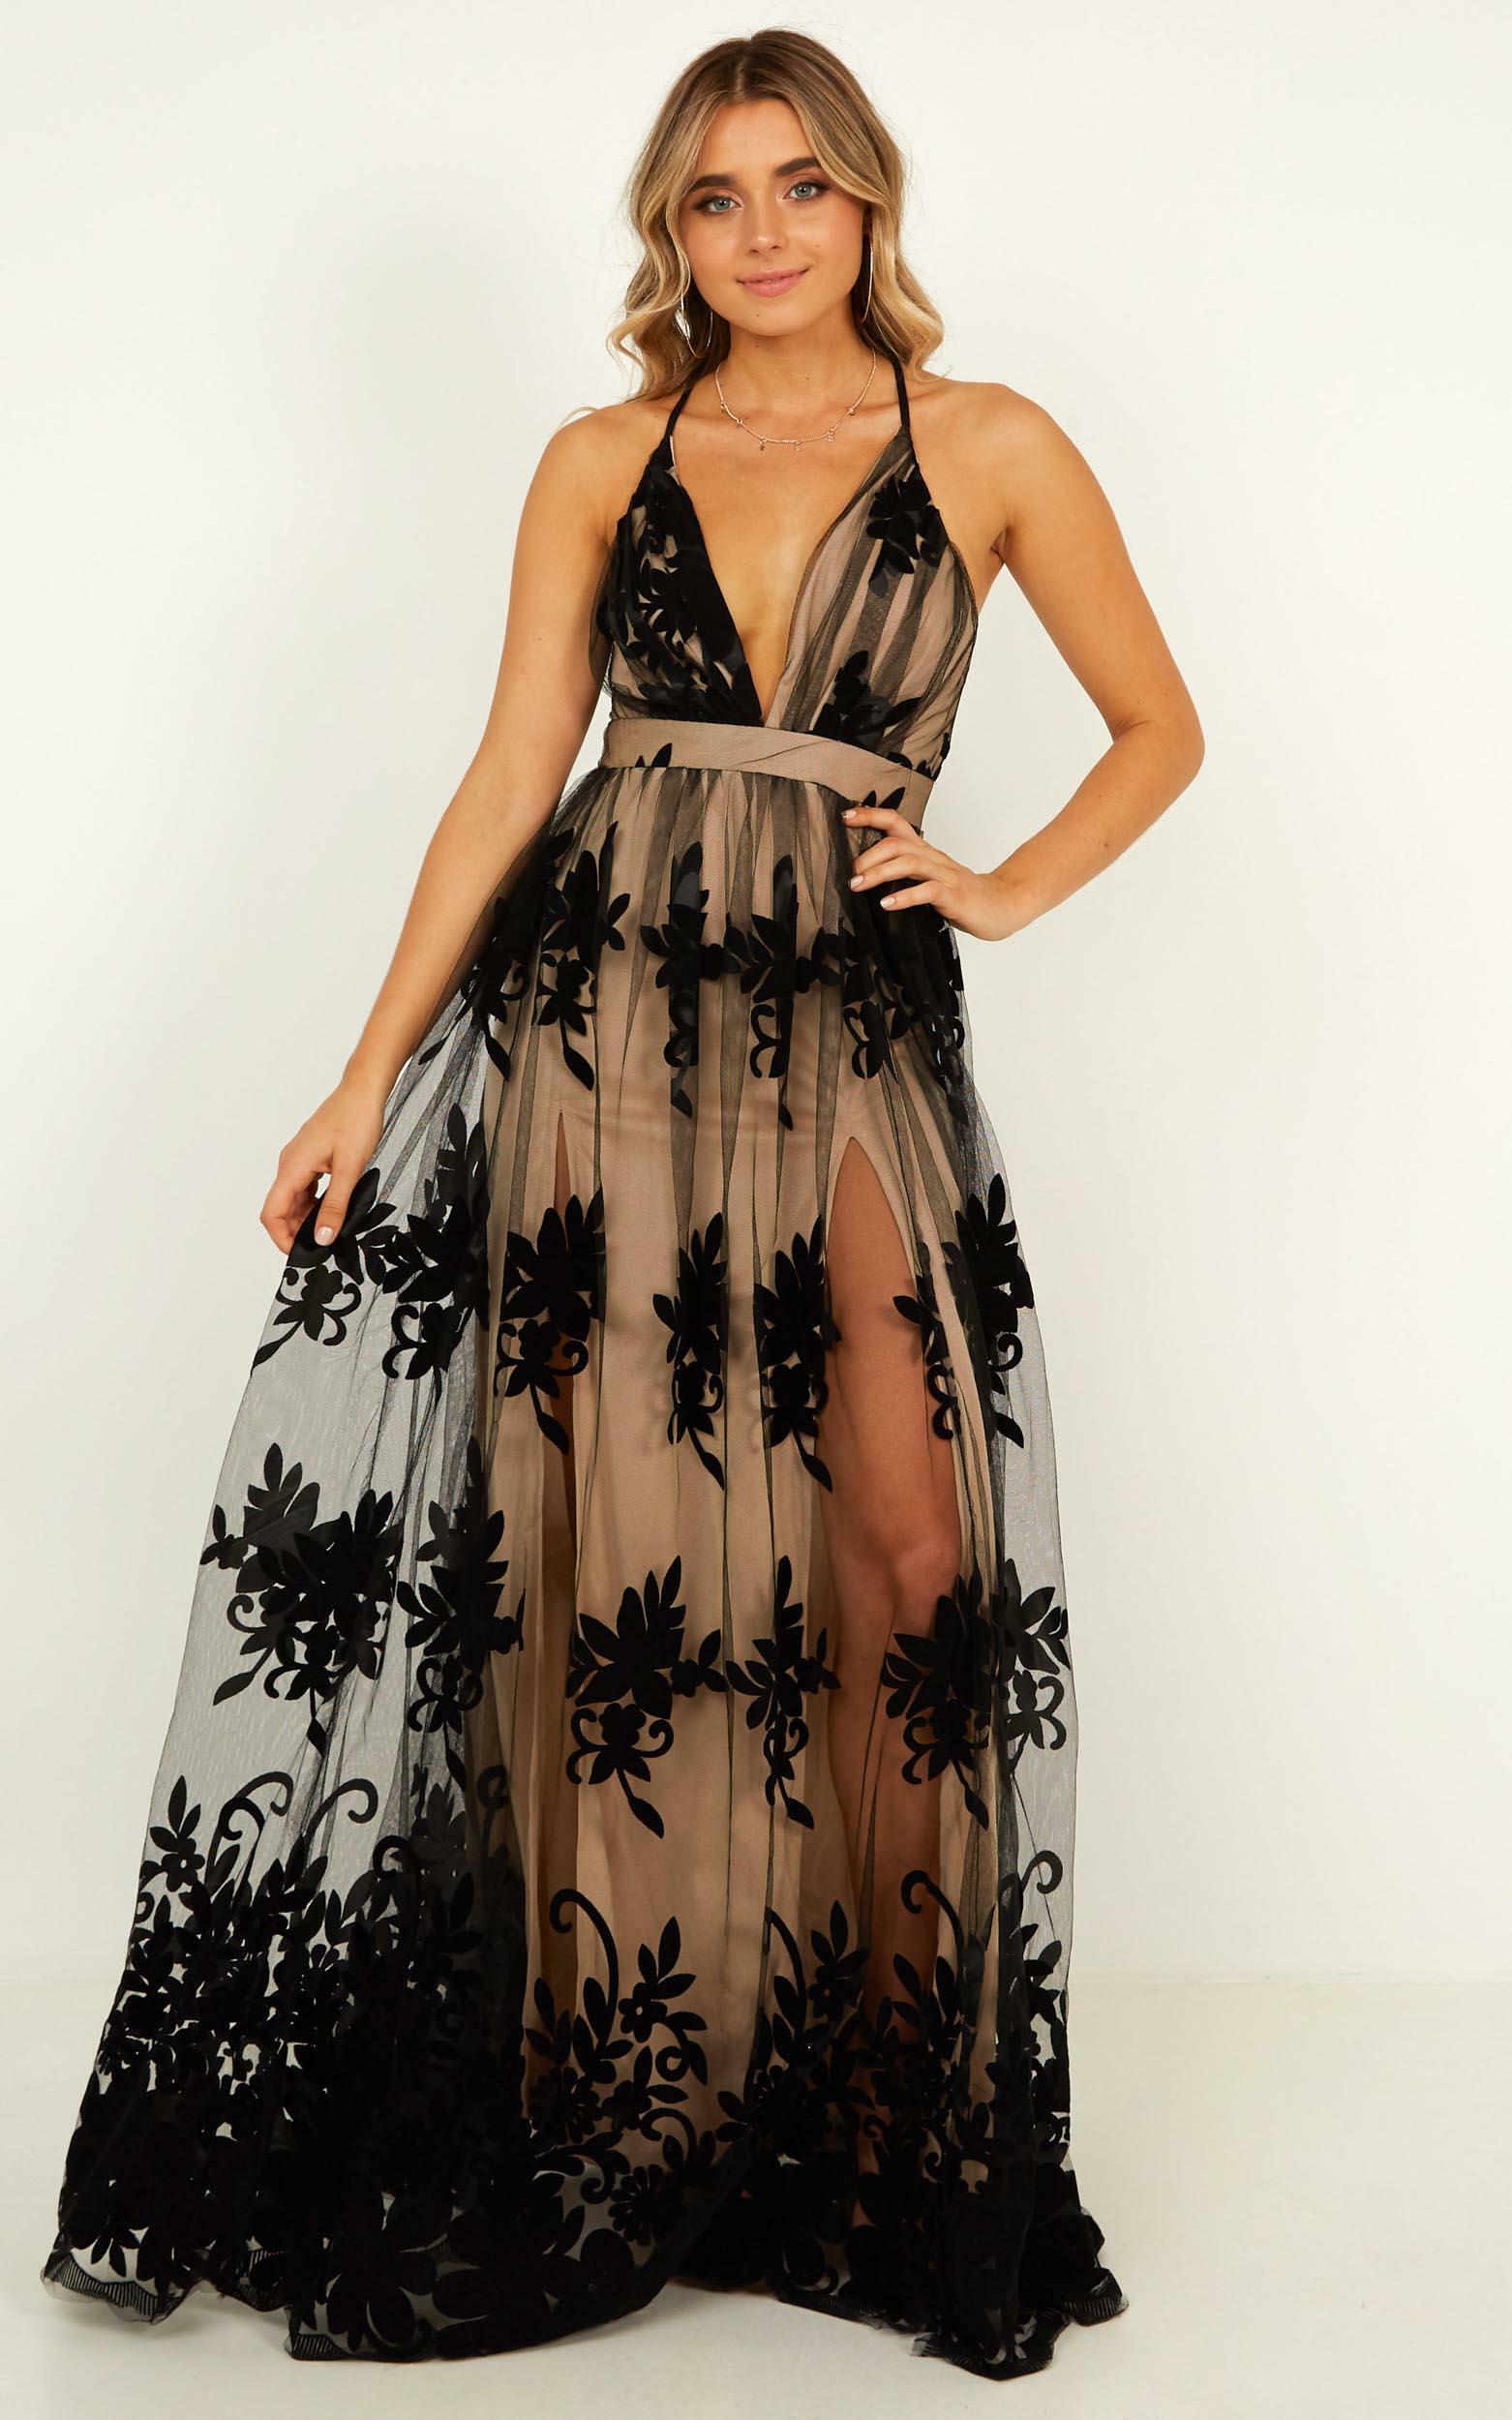 Promenade Maxi Dress in Black And Nude - 08, BLK7, hi-res image number null